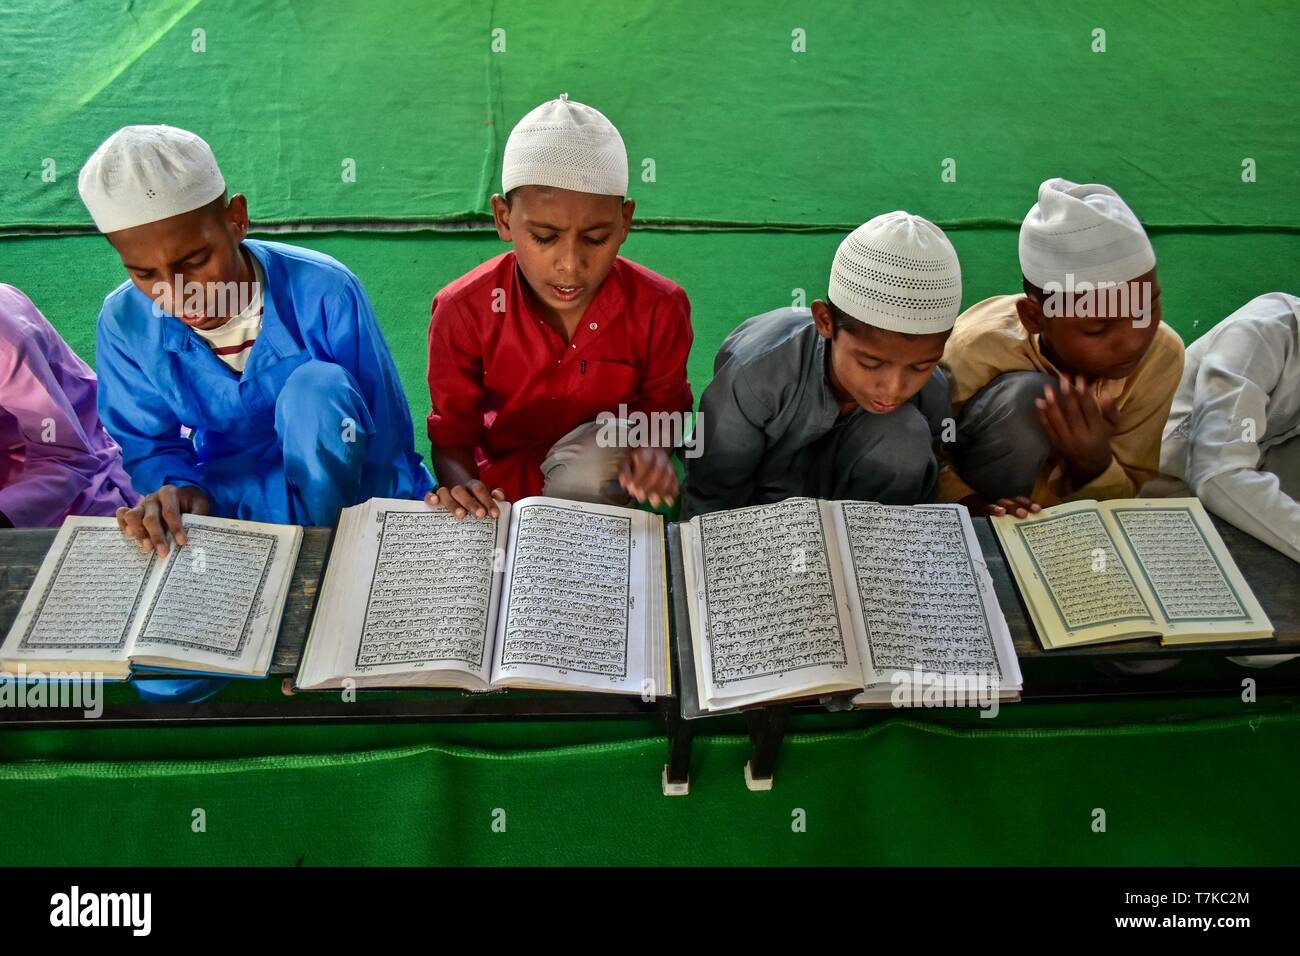 Indian children are seen reciting the holy Quran in a mosque during the first day of the holy fasting month of Ramadan in Patiala district of Punjab. Muslims throughout the world are marking the month of Ramadan, the holiest month in the Islamic calendar in which devotees fast from dawn till dusk. Stock Photo